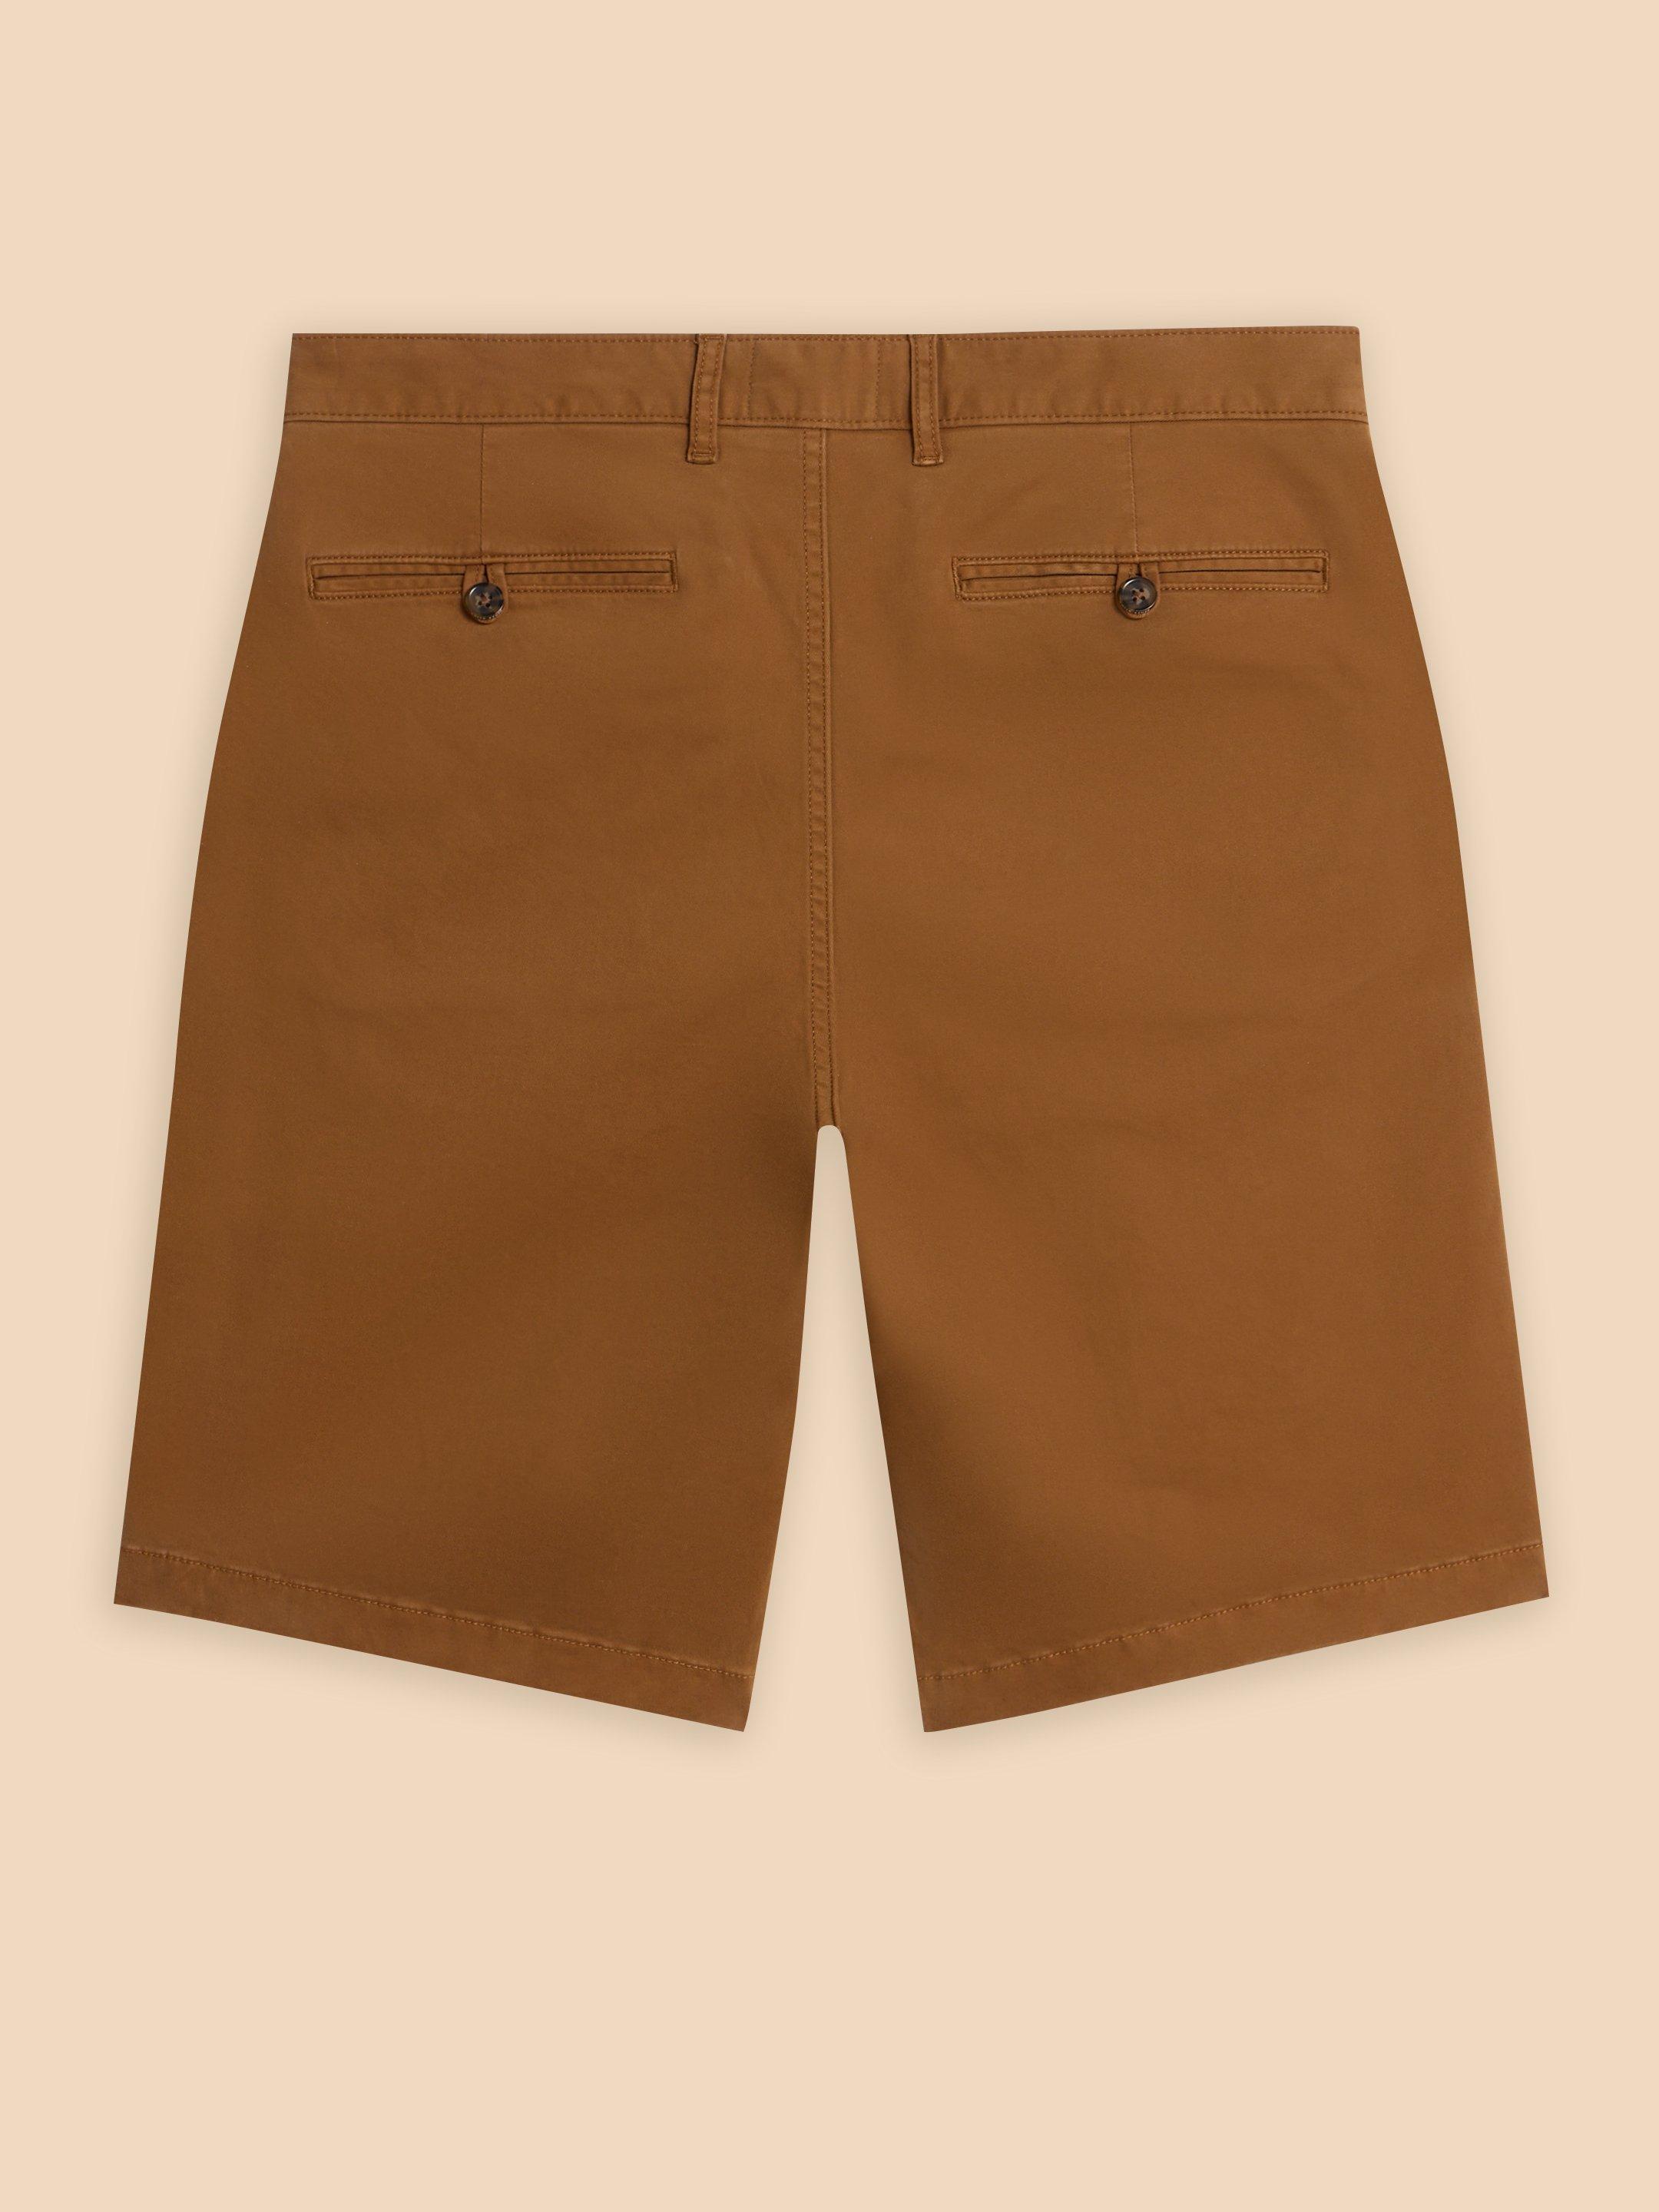 Sutton Organic Chino Short in MID BROWN - FLAT BACK